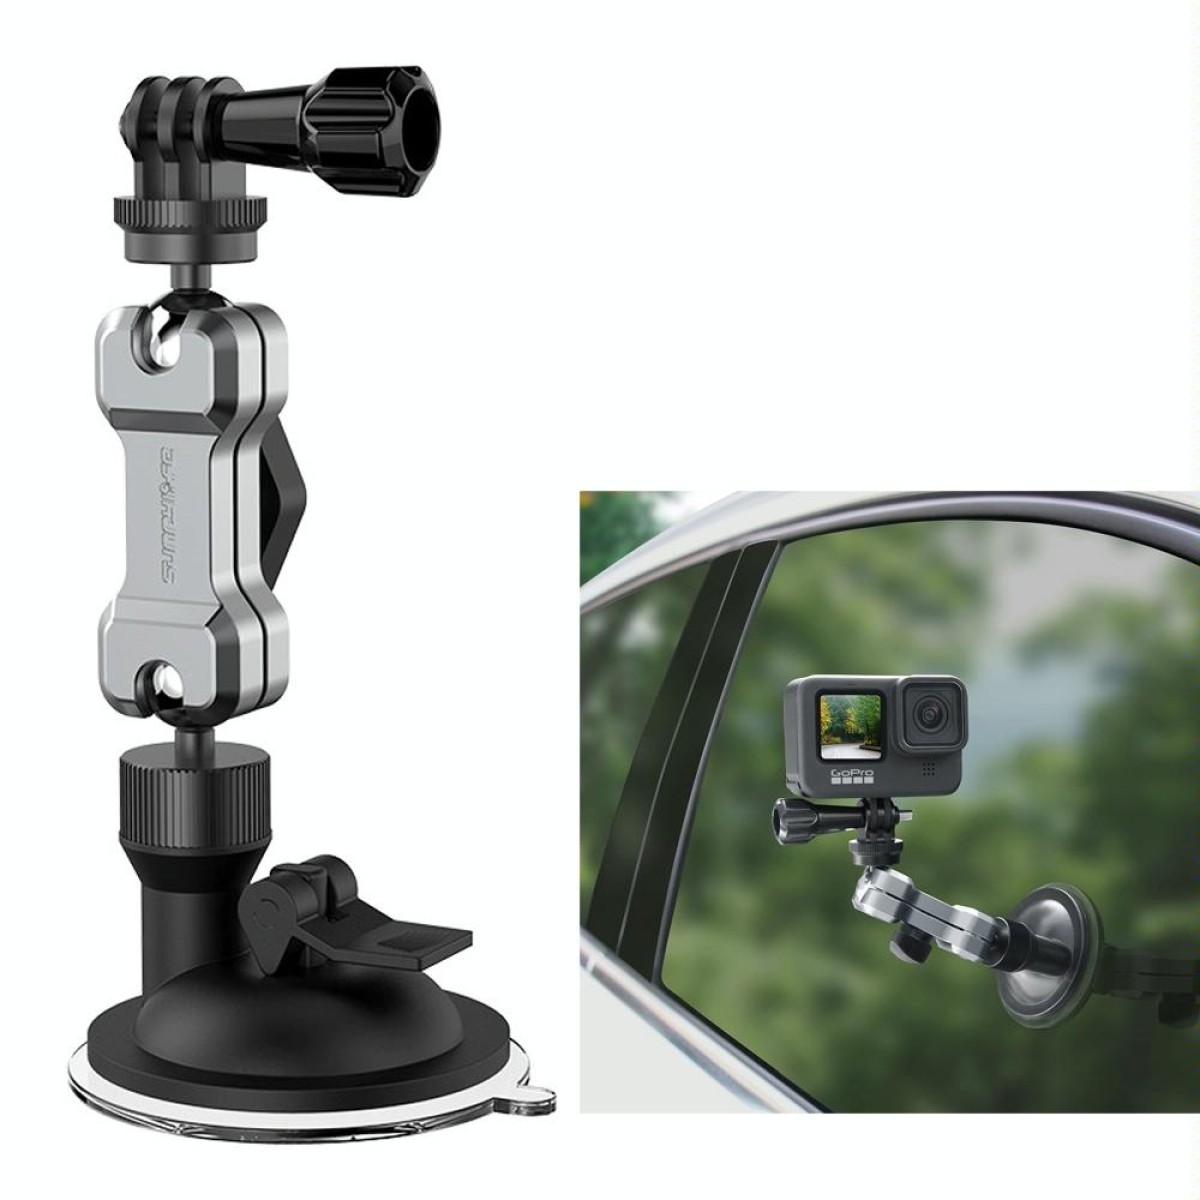 Sunnylife TY-Q9415 Aluminum Alloy Phone Holder Car Suction Cup Bracket Holder for GoPro Hero11 Black / HERO10 Black /9 Black /8 Black /7 /6 /5 /5 Session /4 Session /4 /3+ /3 /2 /1, DJI Osmo Action and Other Action Cameras, Colour: Bracket